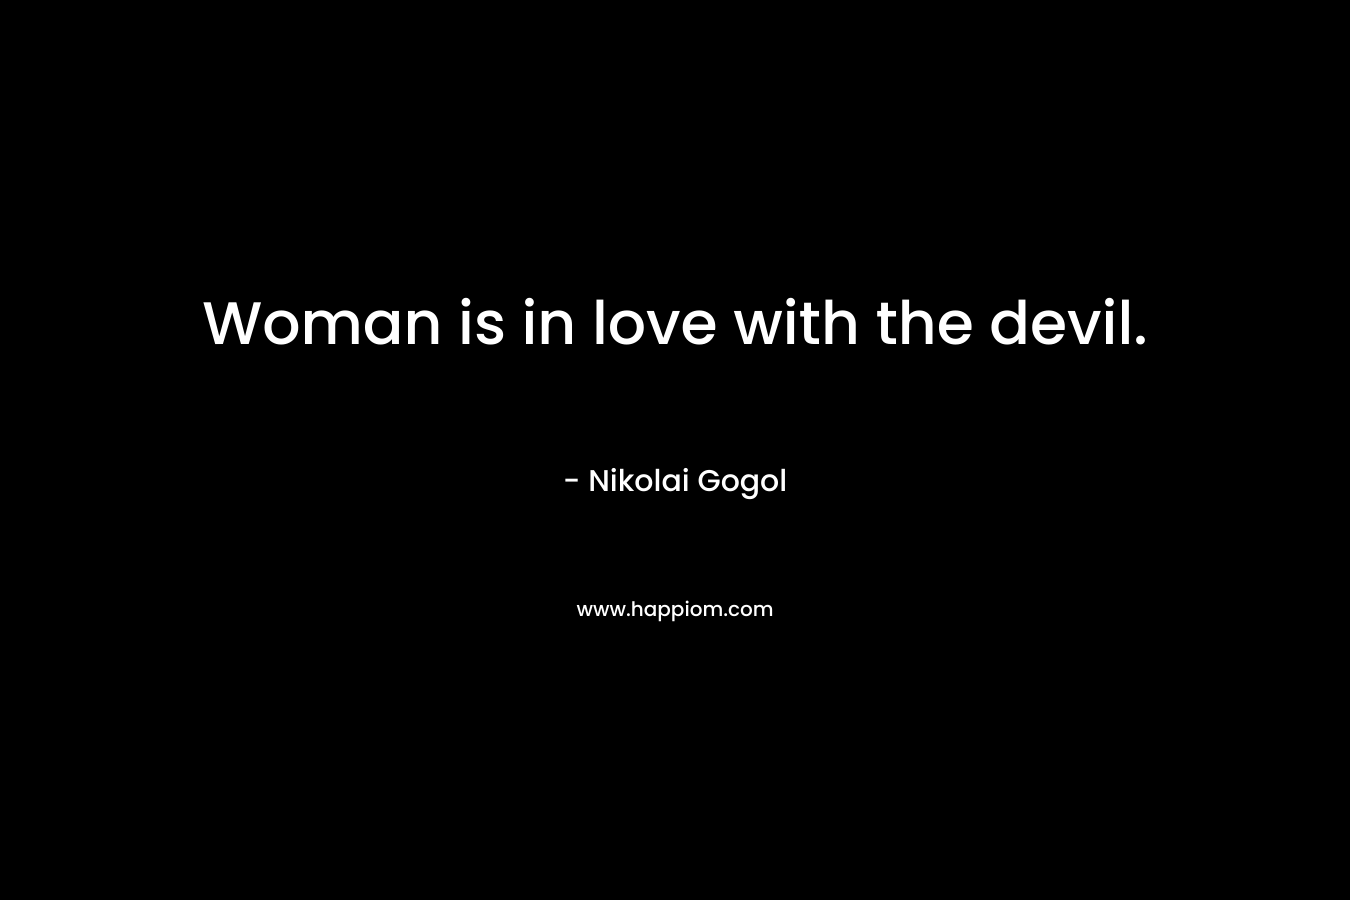 Woman is in love with the devil. – Nikolai Gogol